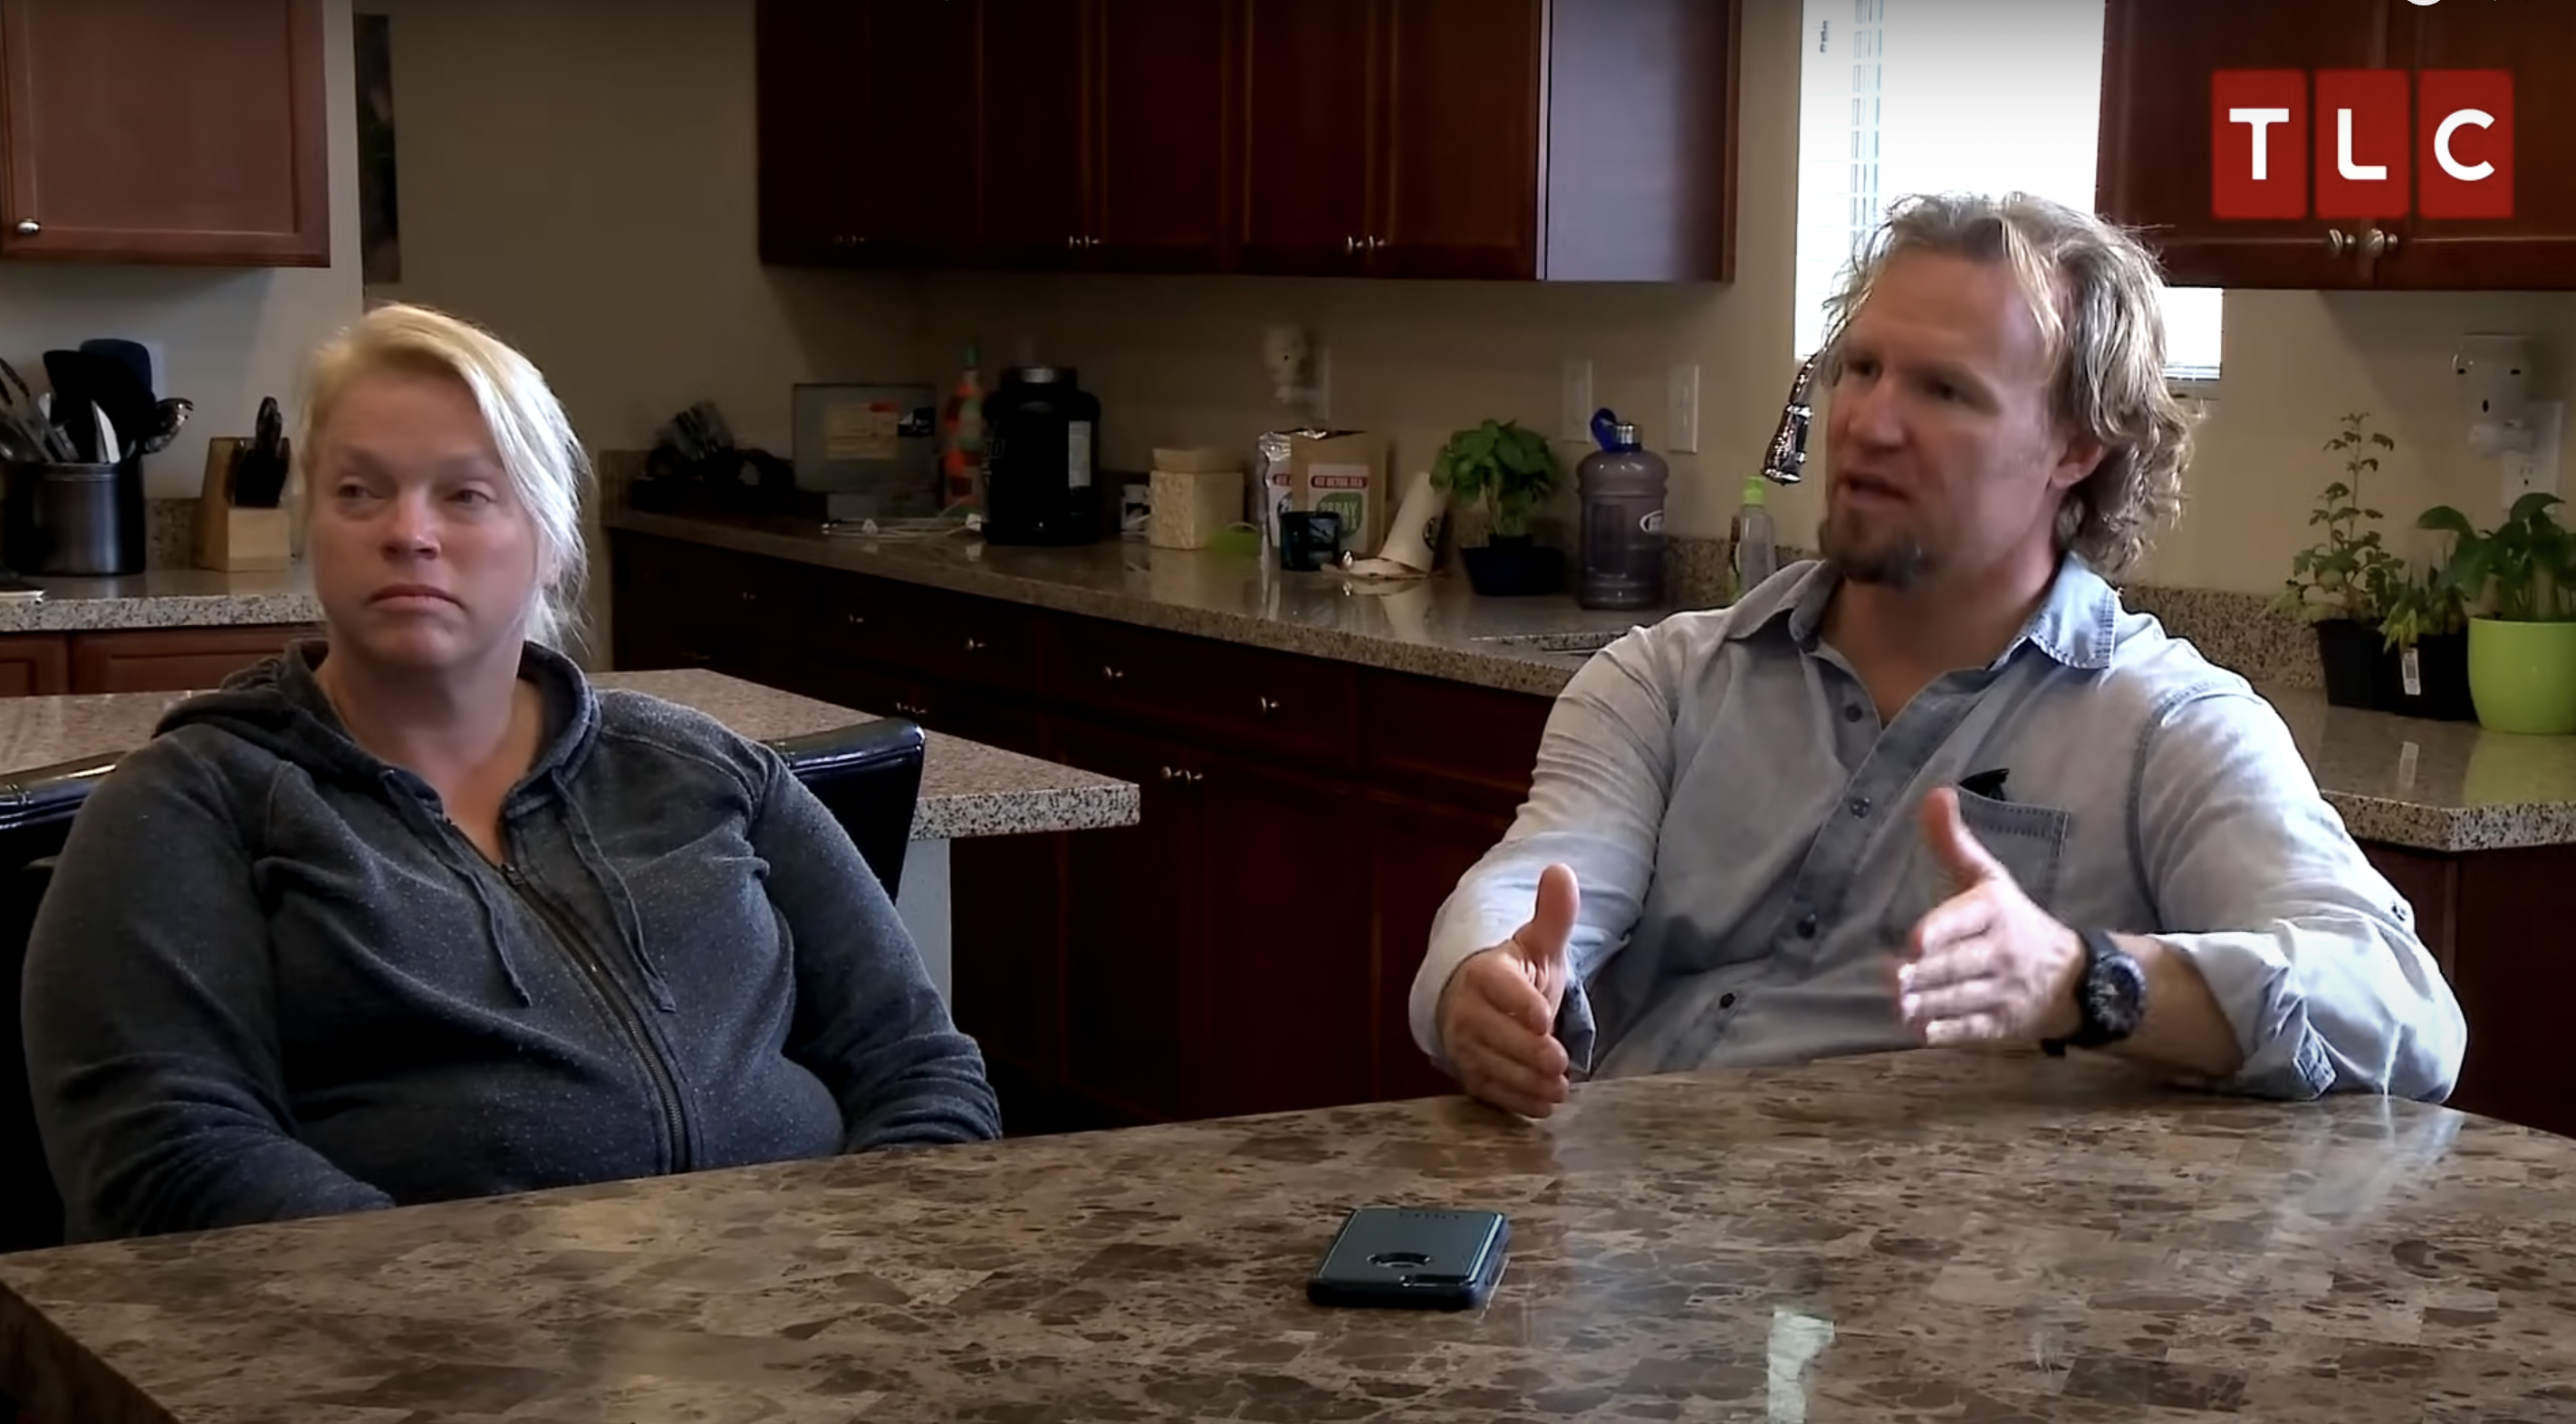 Janelle and Kody Brown in a conversation with Garrison Brown (not in frame), during an episode of "Sister Wives," discussing Garrison's intent to join the National Guard, published on May 19, 2016 | Source: youtube/tlc